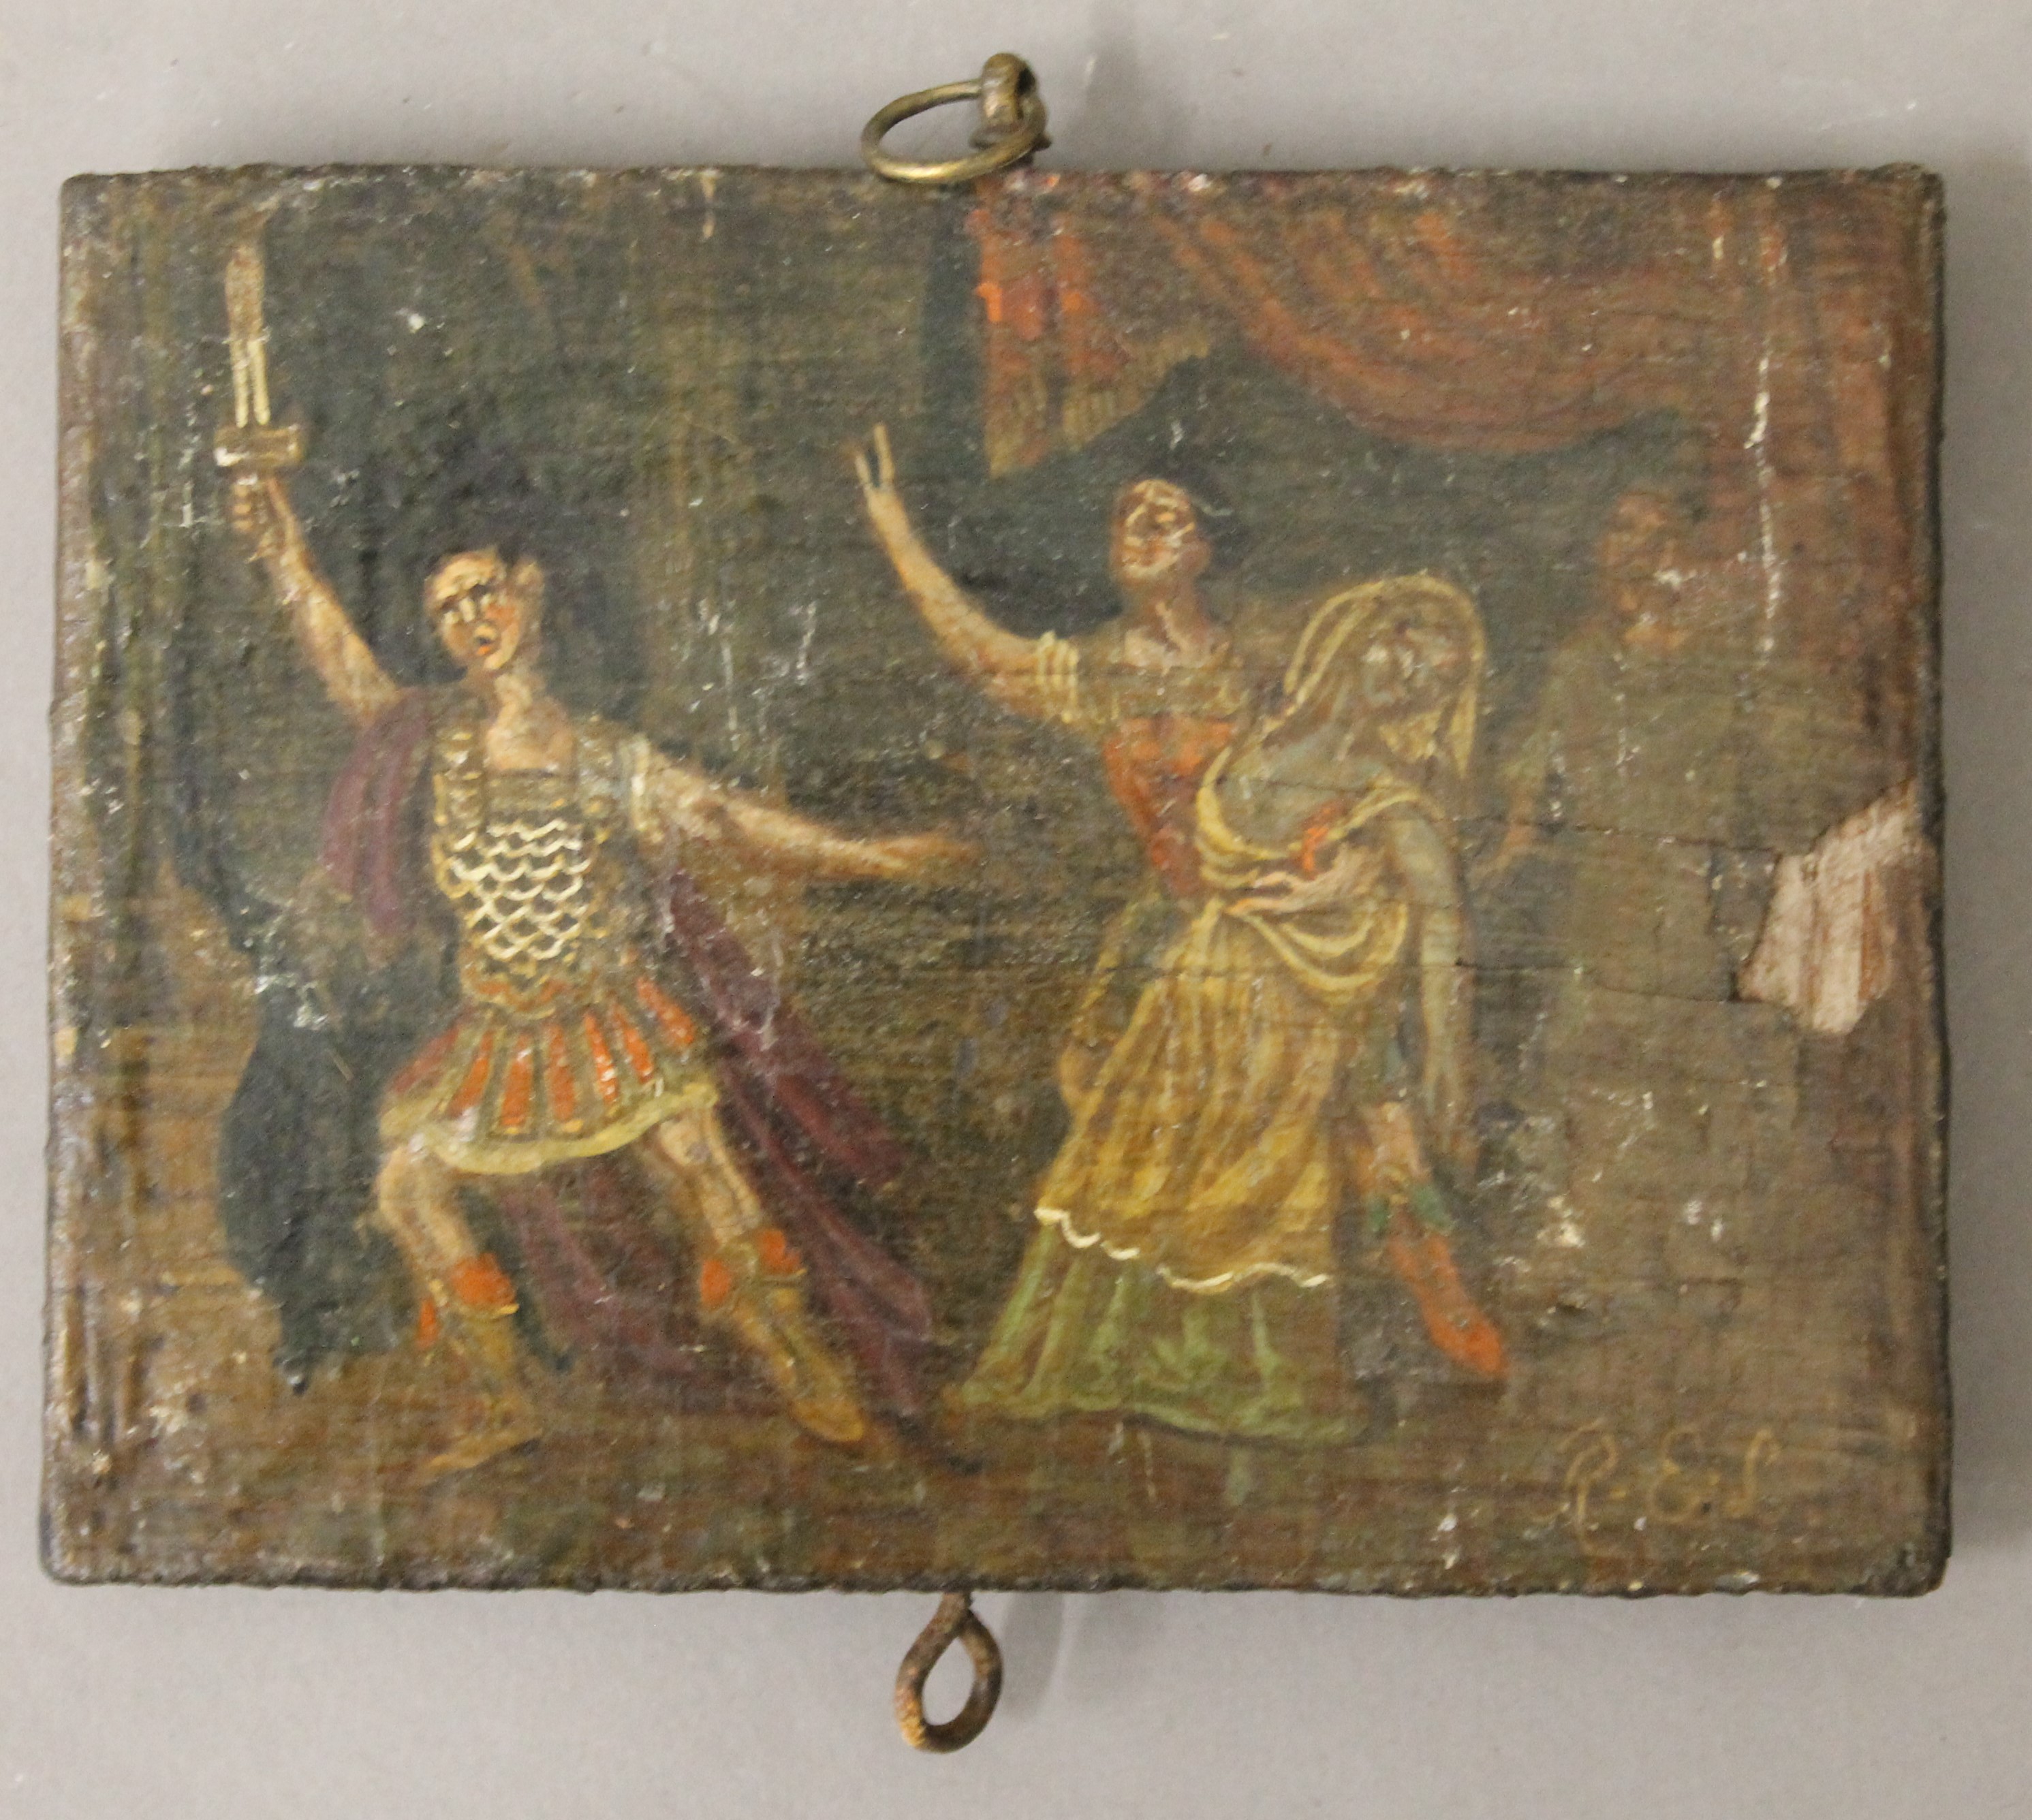 A collection of 18th/19th century miniature paintings on panel, initialled R.E.L. - Image 6 of 10